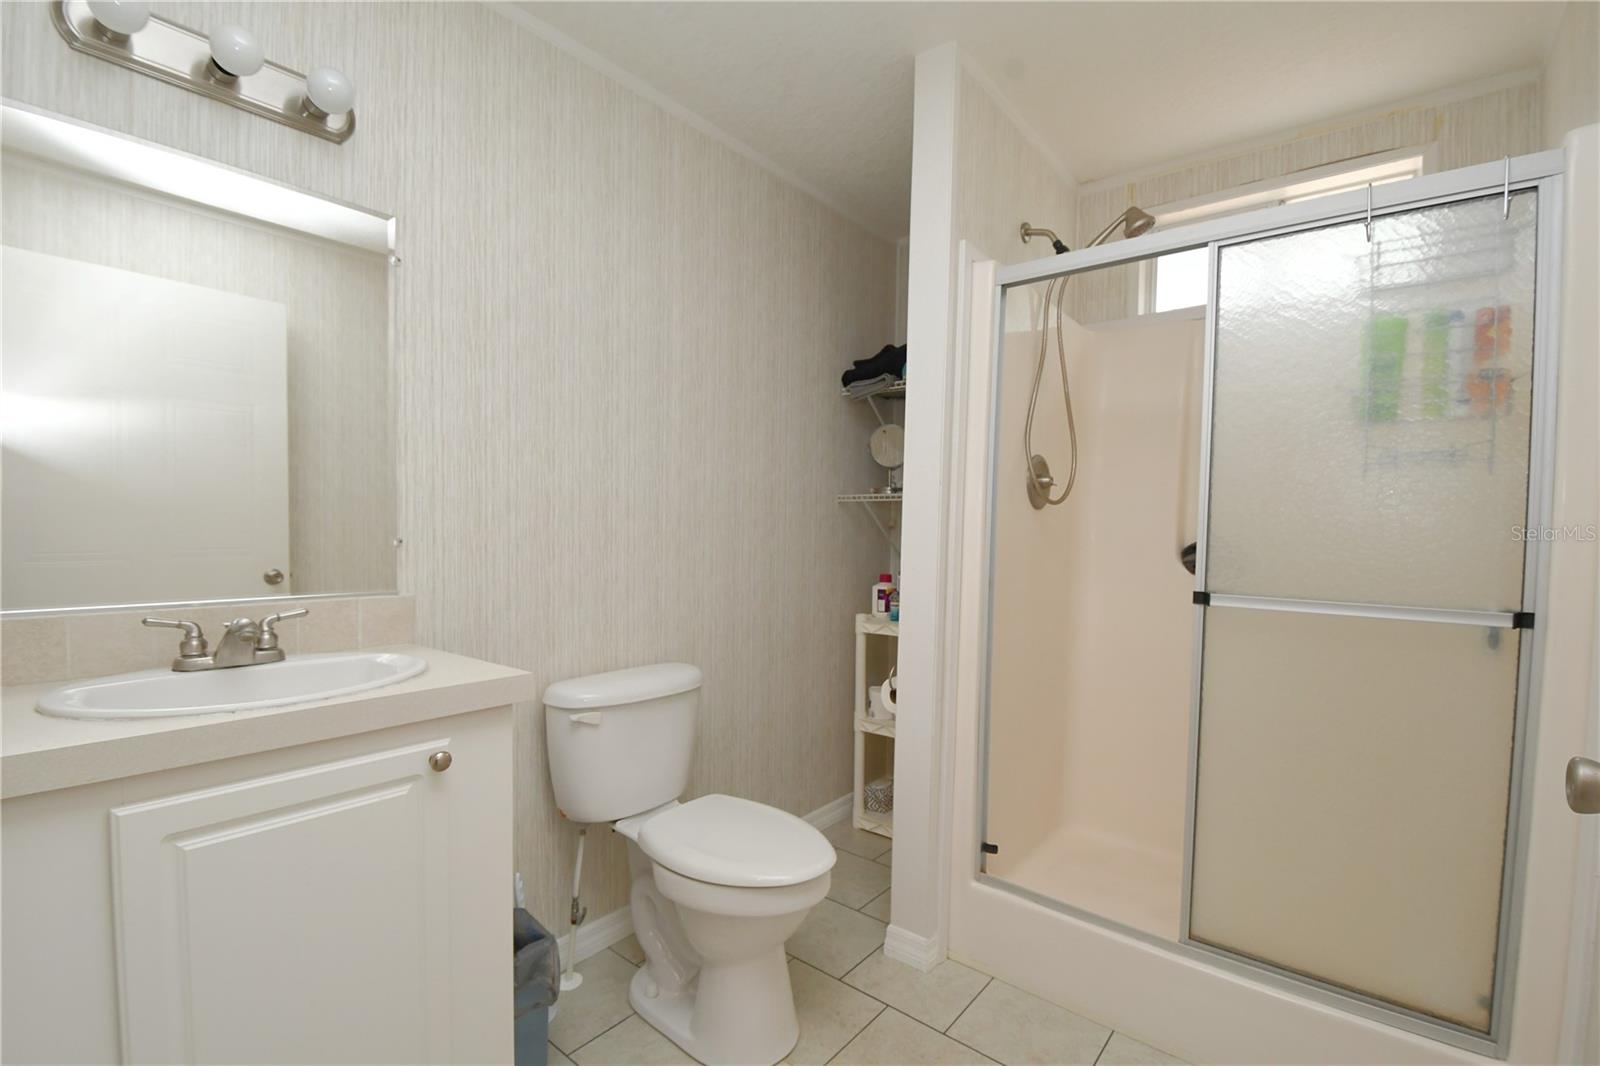 The 2nd bathroom has a walk-in shower, an upgraded Kohler commode, and a mirrored vanity with storage and lighting.